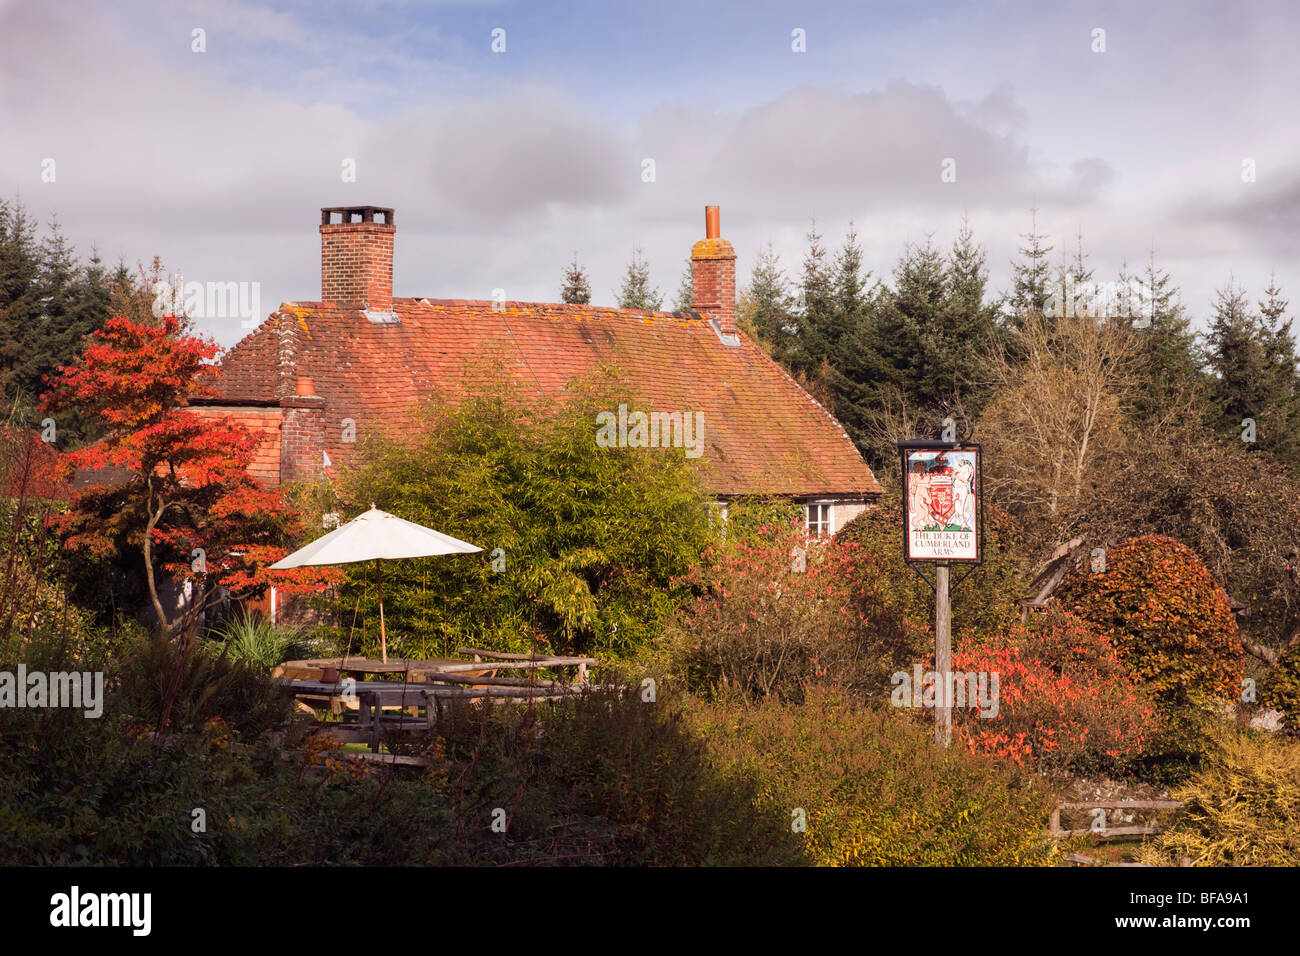 The Duke of Cumberland country pub in hamlet near Midhurst in South Downs National Park in autumn. Henley West Sussex England UK Stock Photo